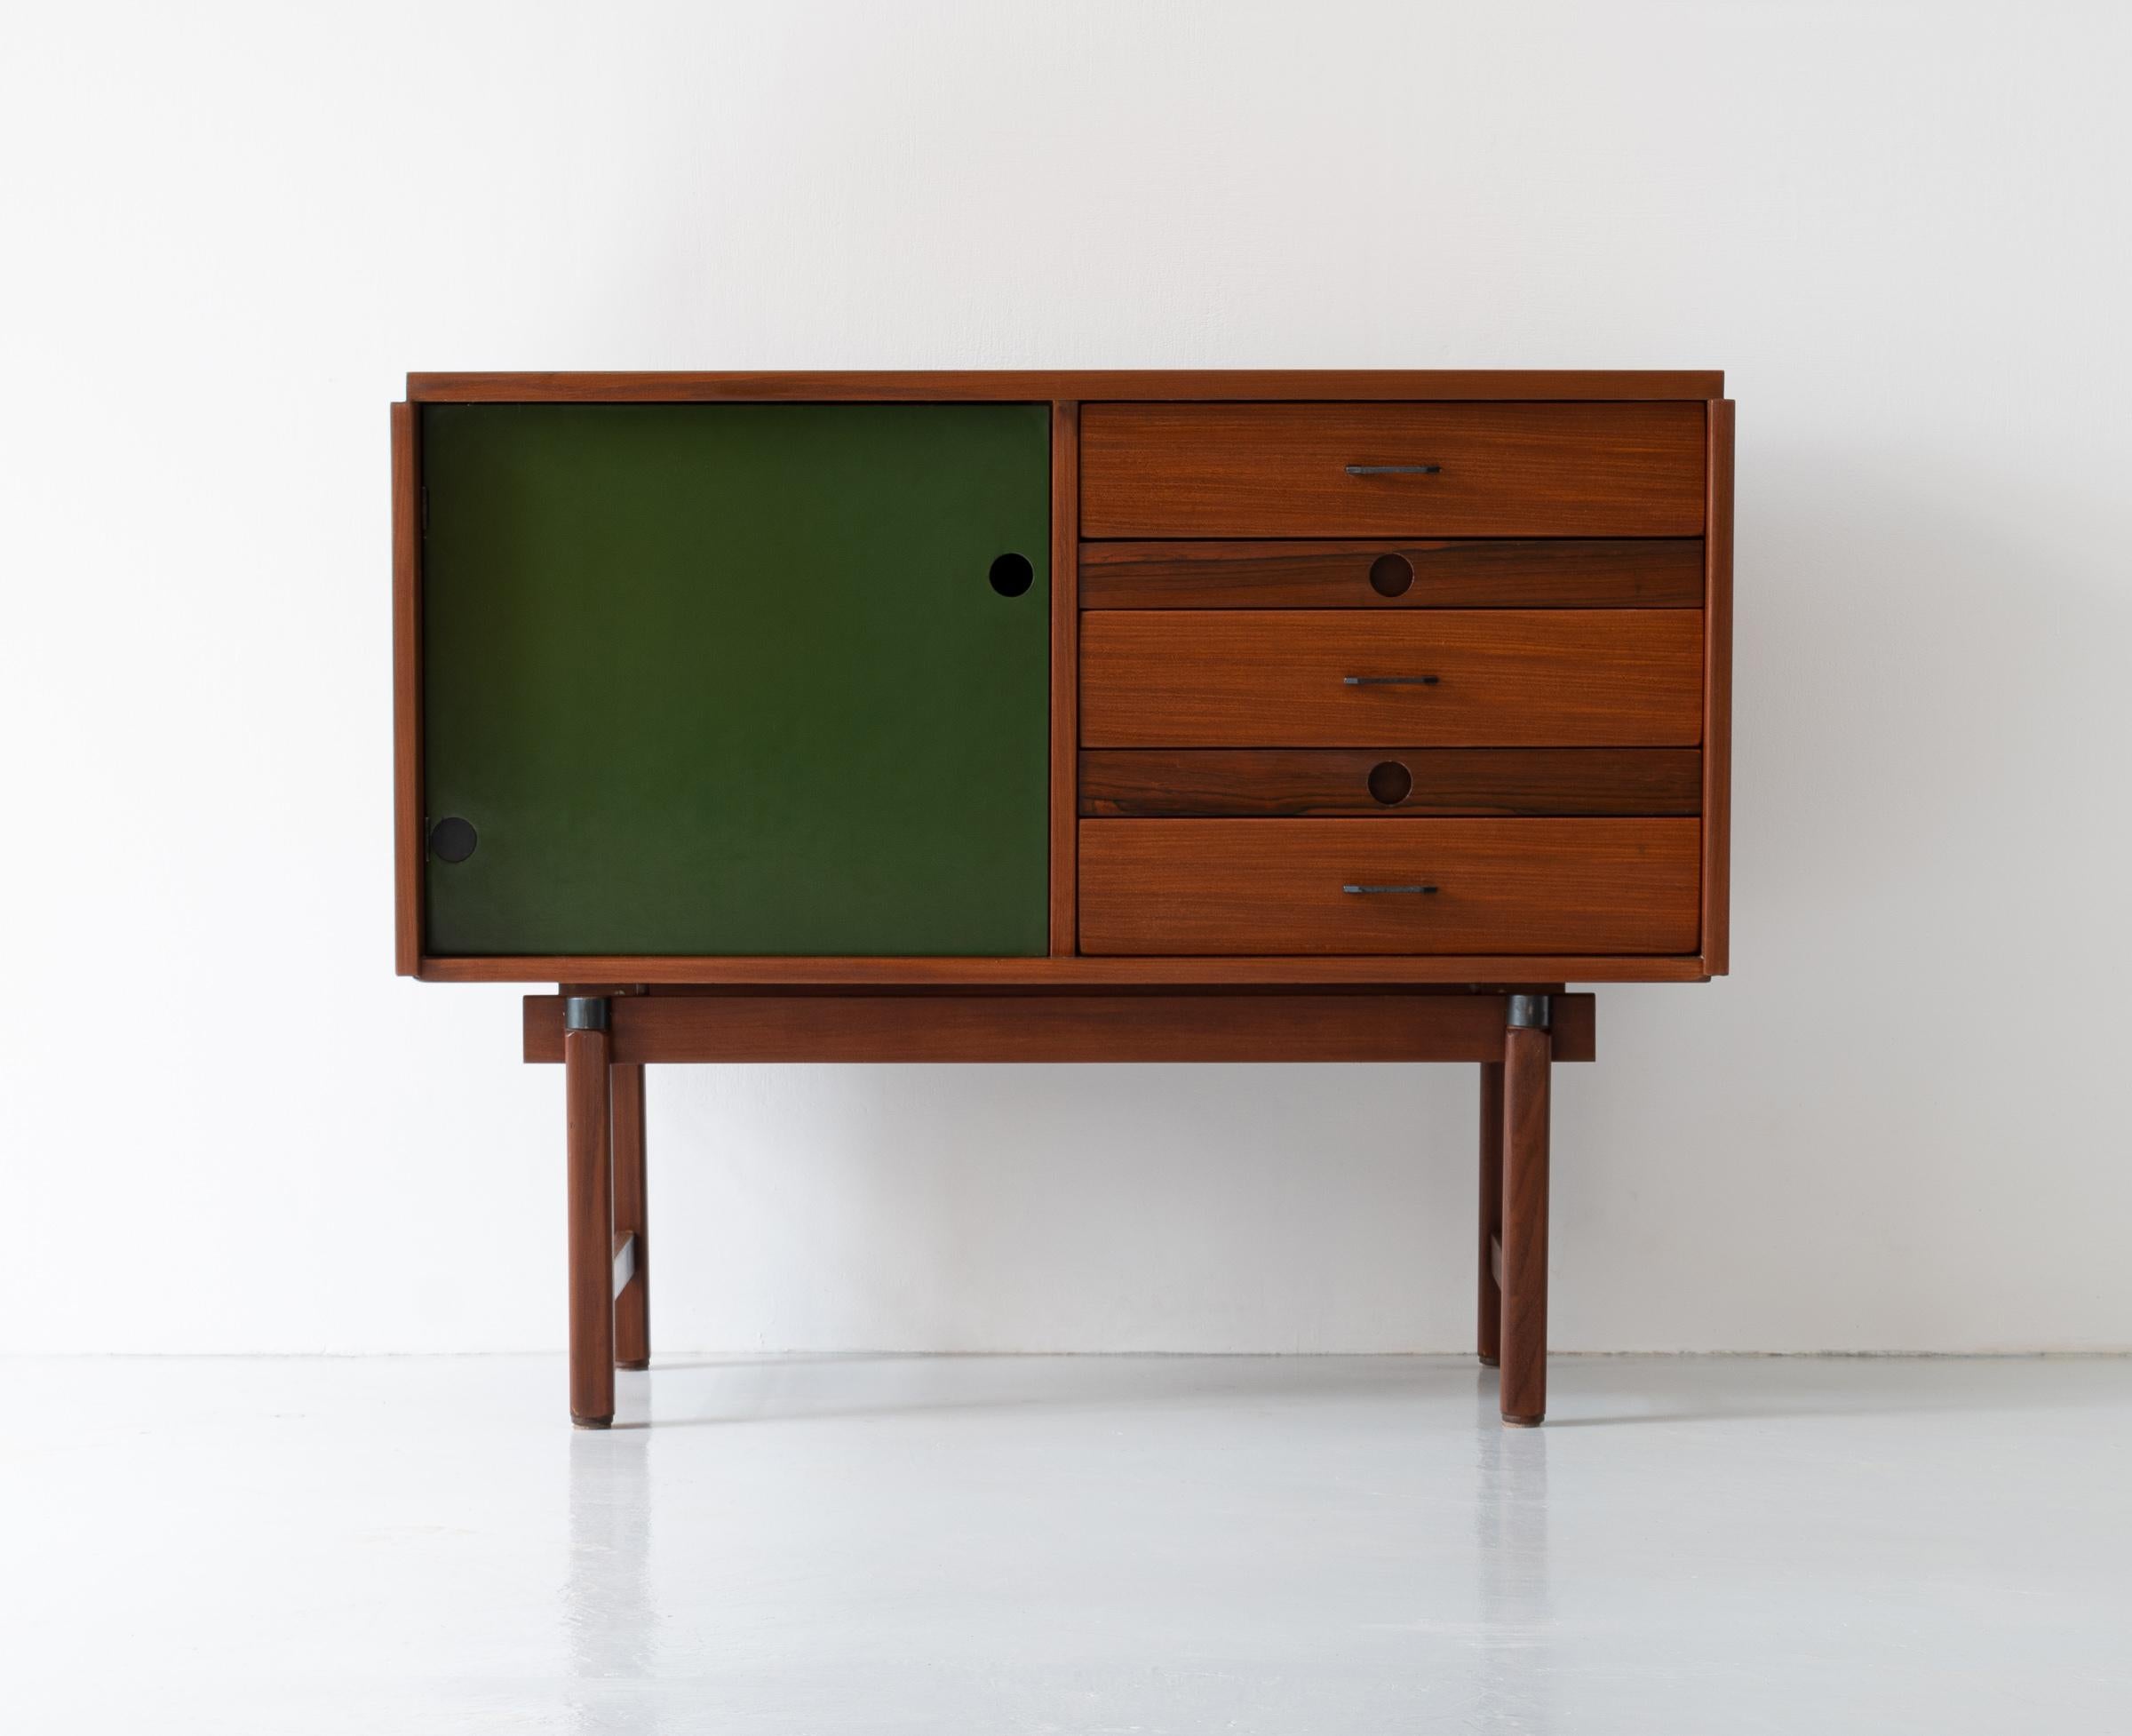 A small sideboard of Italian manufacture, designed and produced in the 1950s.

Fully restored: complete sanding of the original finish, new glued and added structural parts, geometric realignment, new shellac finish, new shellac green lacquer.